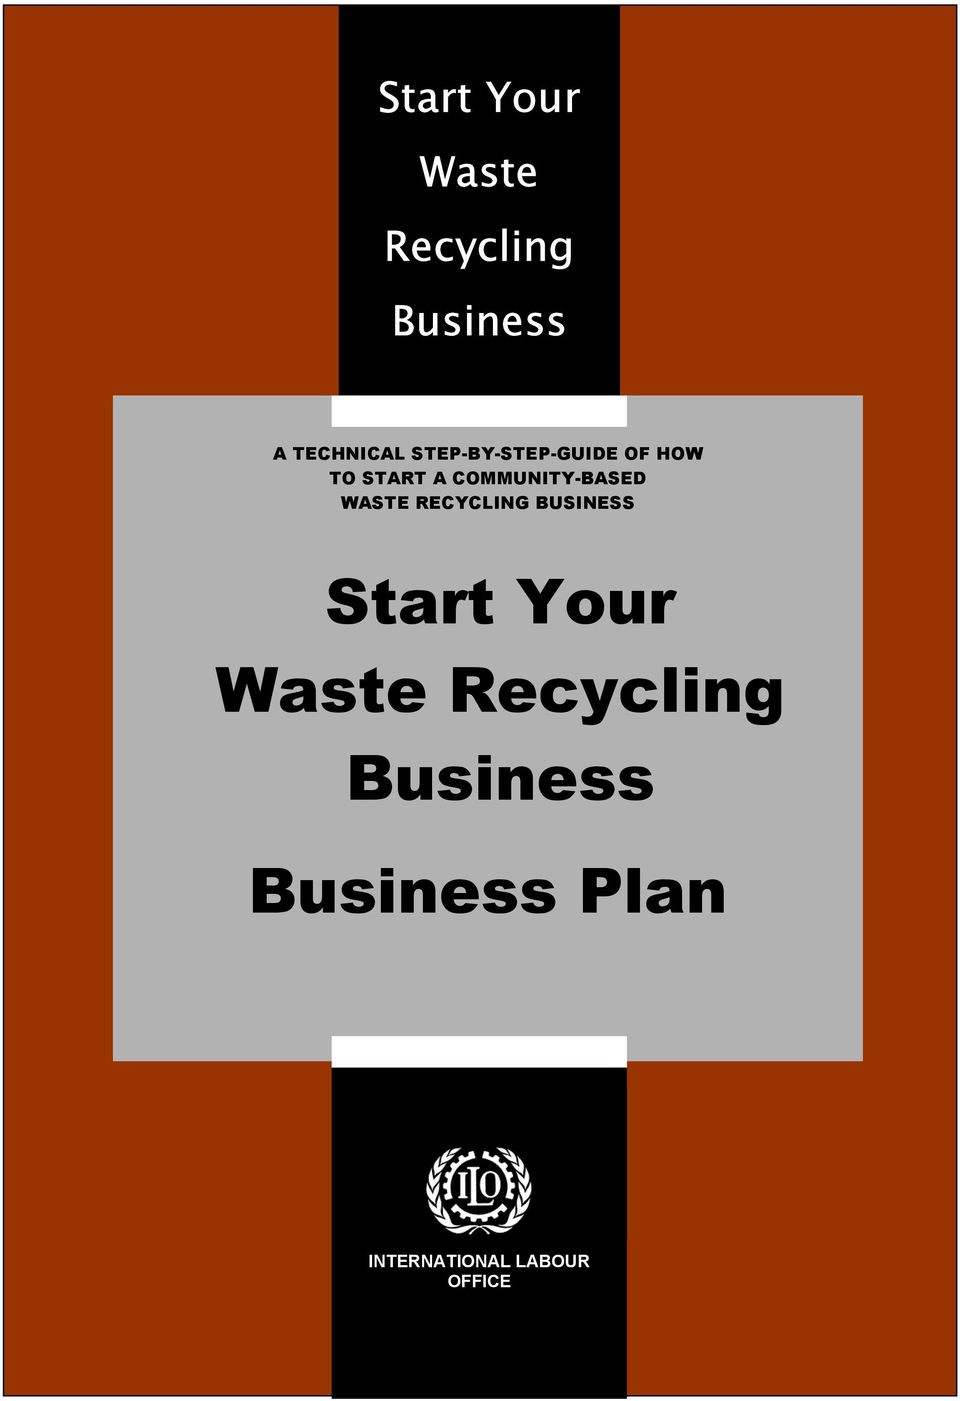 COMMUNITY-BASED WASTE RECYCLING BUSINESS Start Your